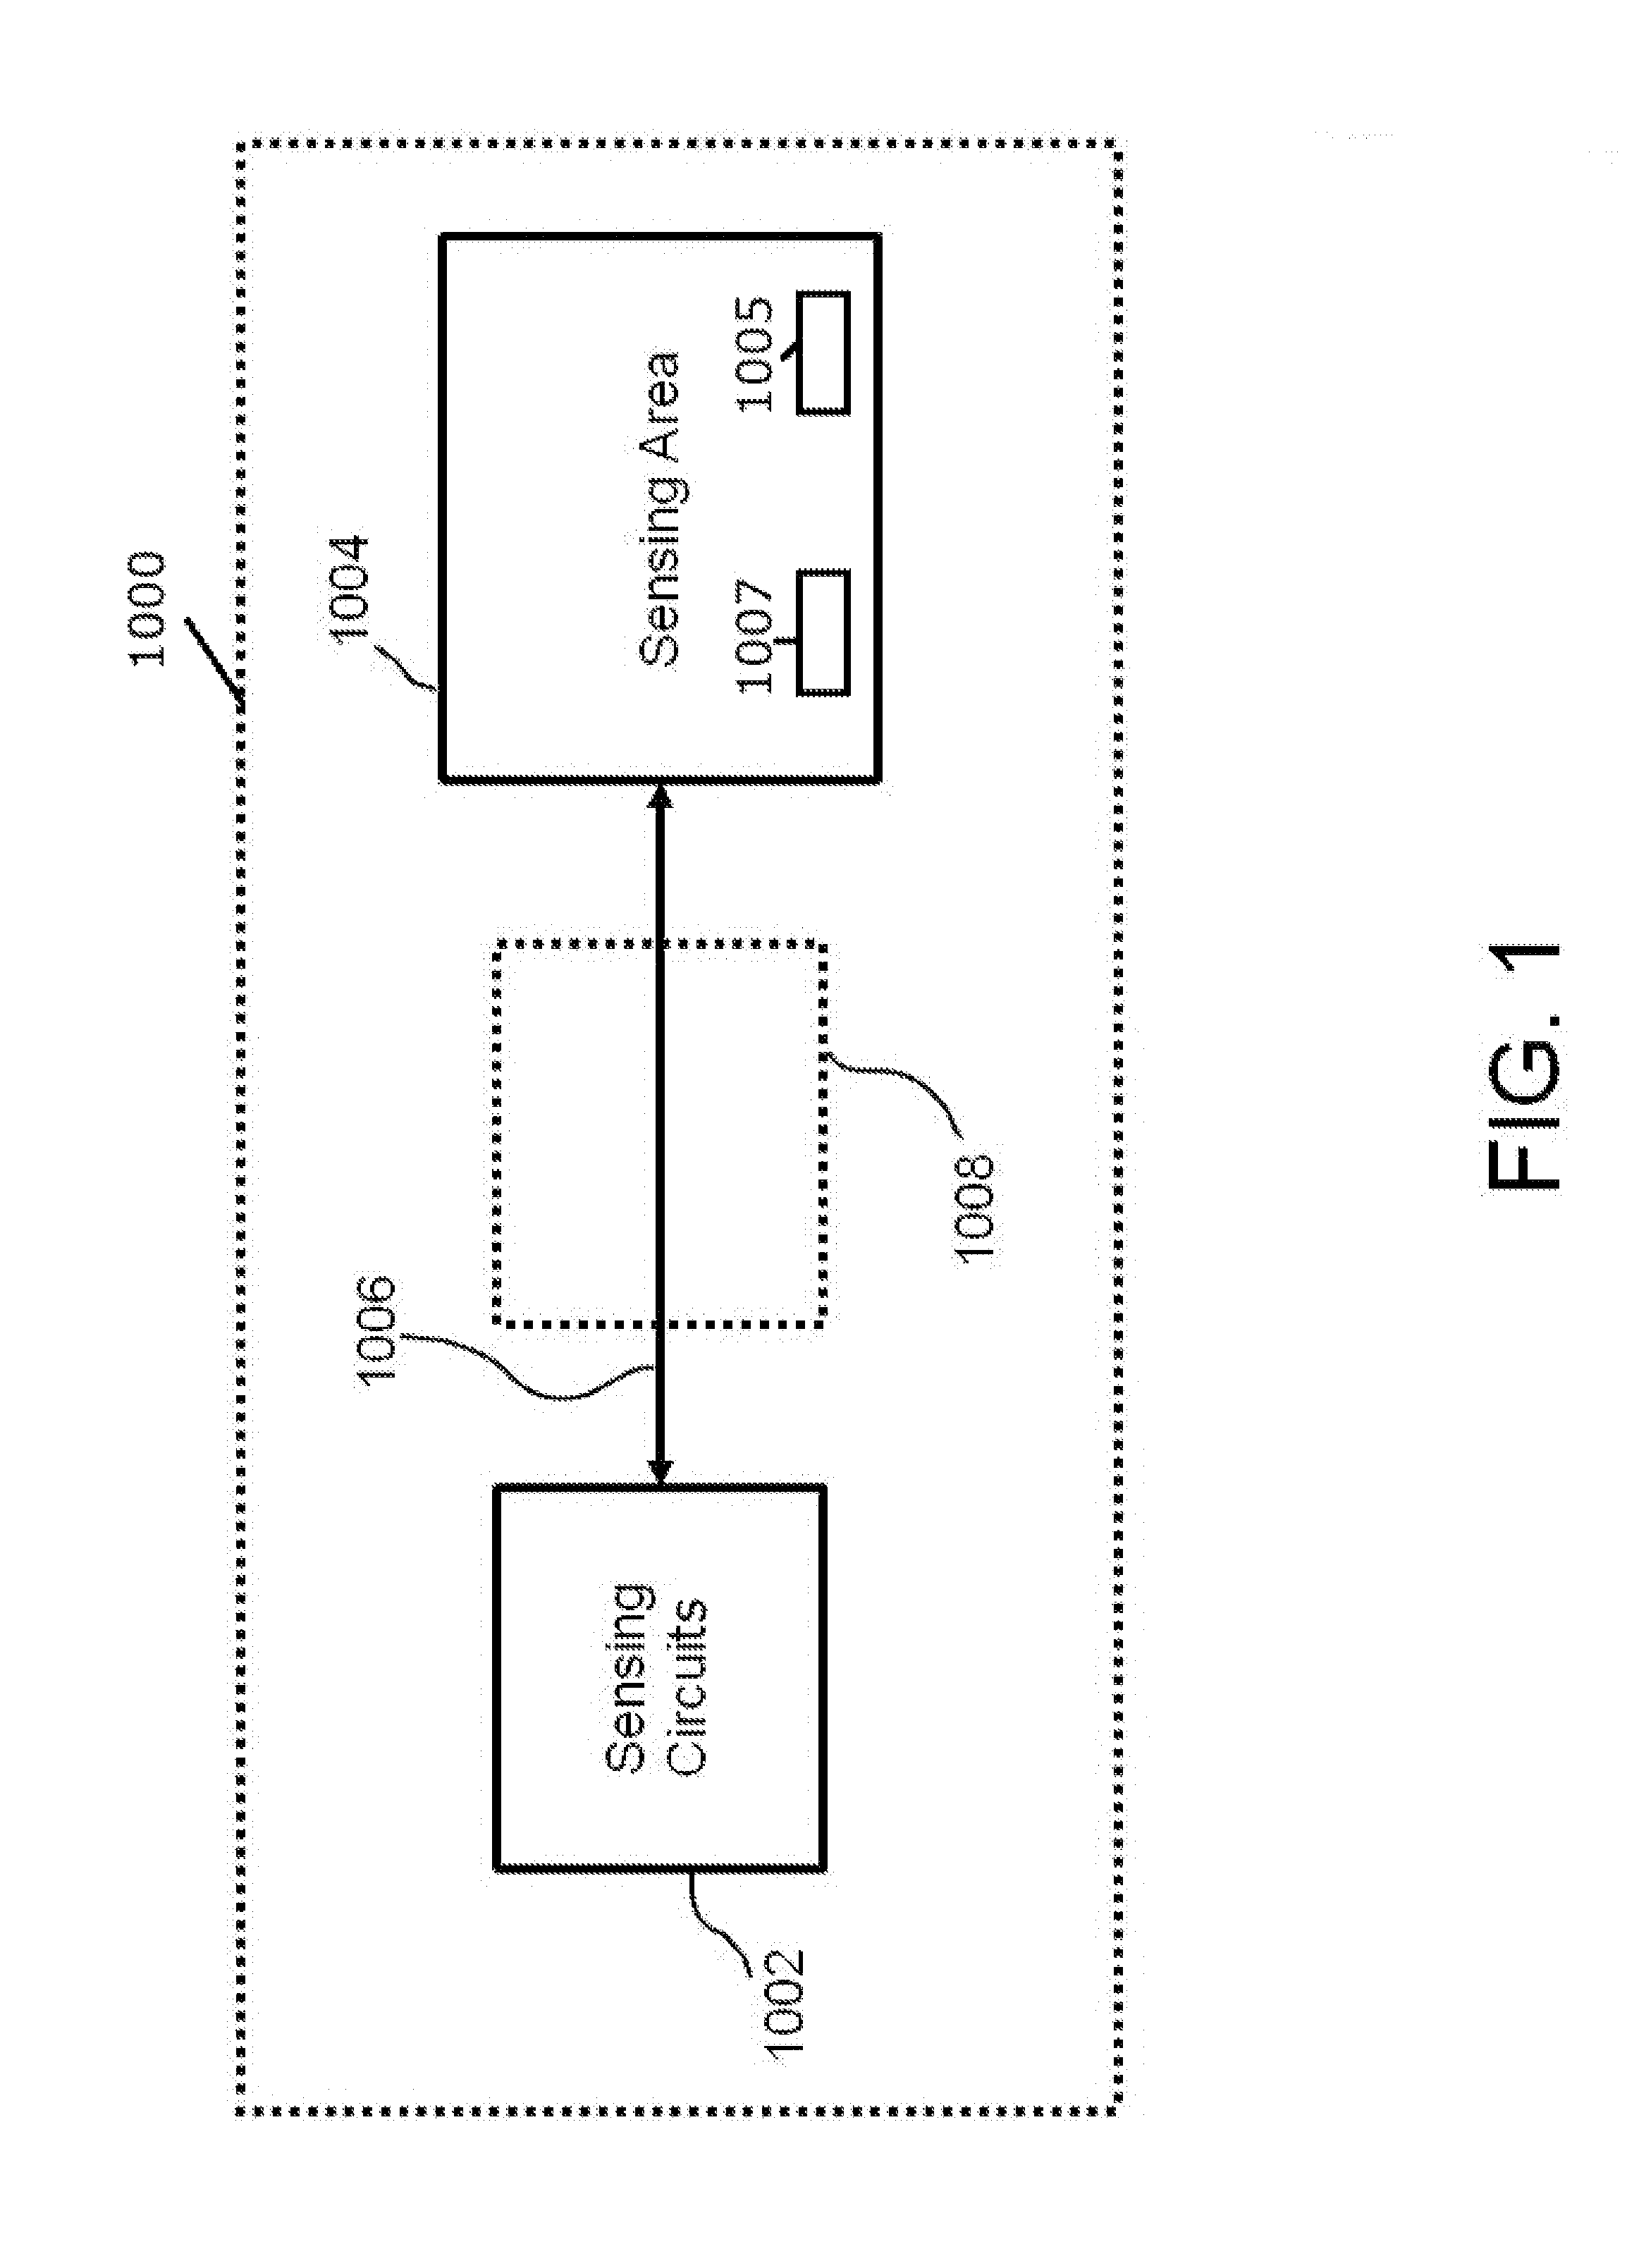 Prevention of interference between wireless power transmission systems and touch surfaces